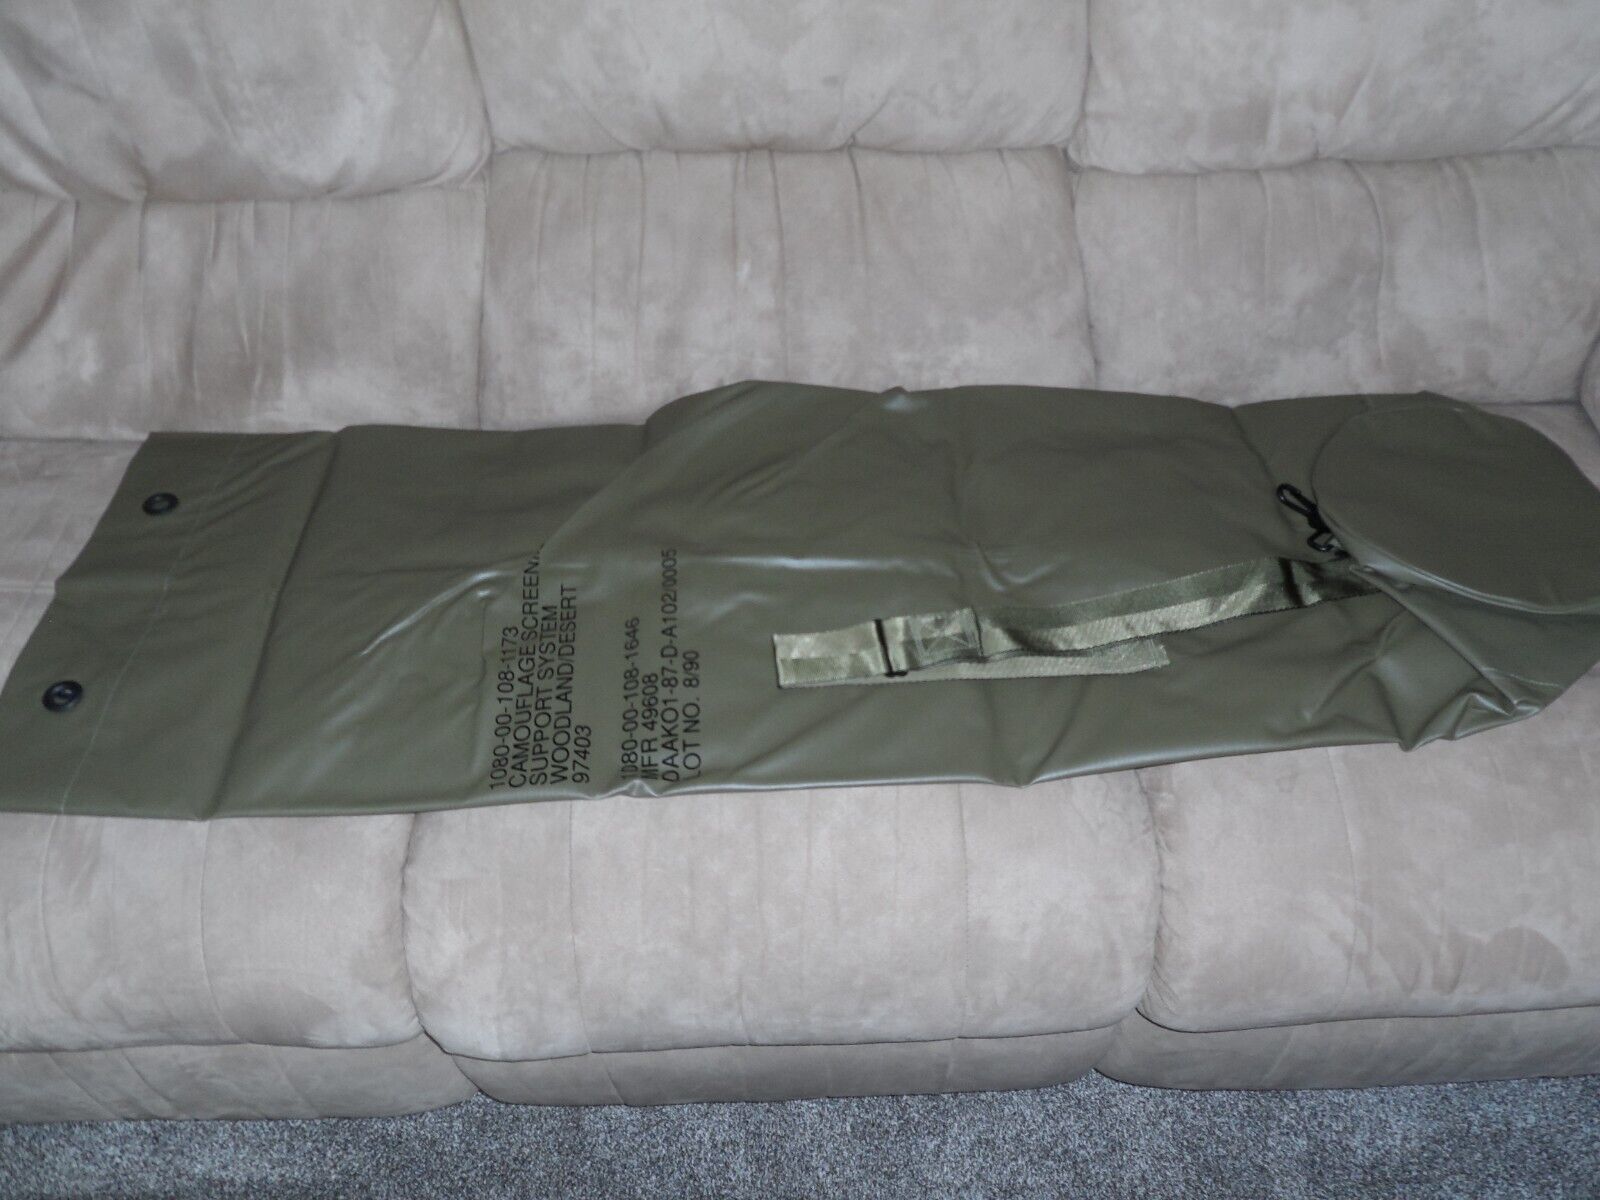 CAMOFLAGUE NETTING SUPPORT SYSTEM BAG